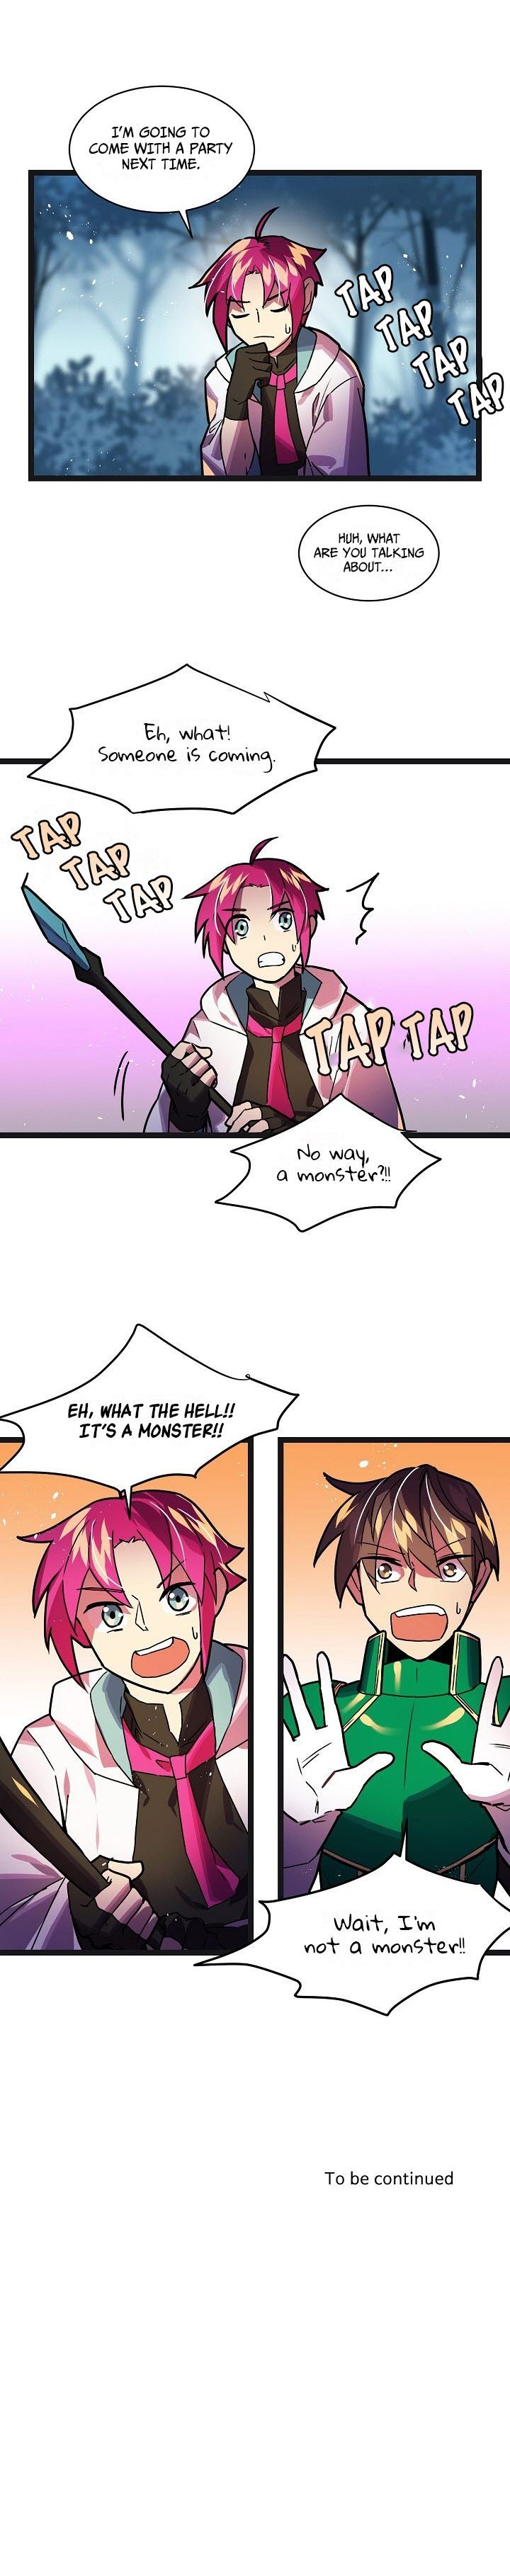 Ranker's Return Chapter 20 page 10